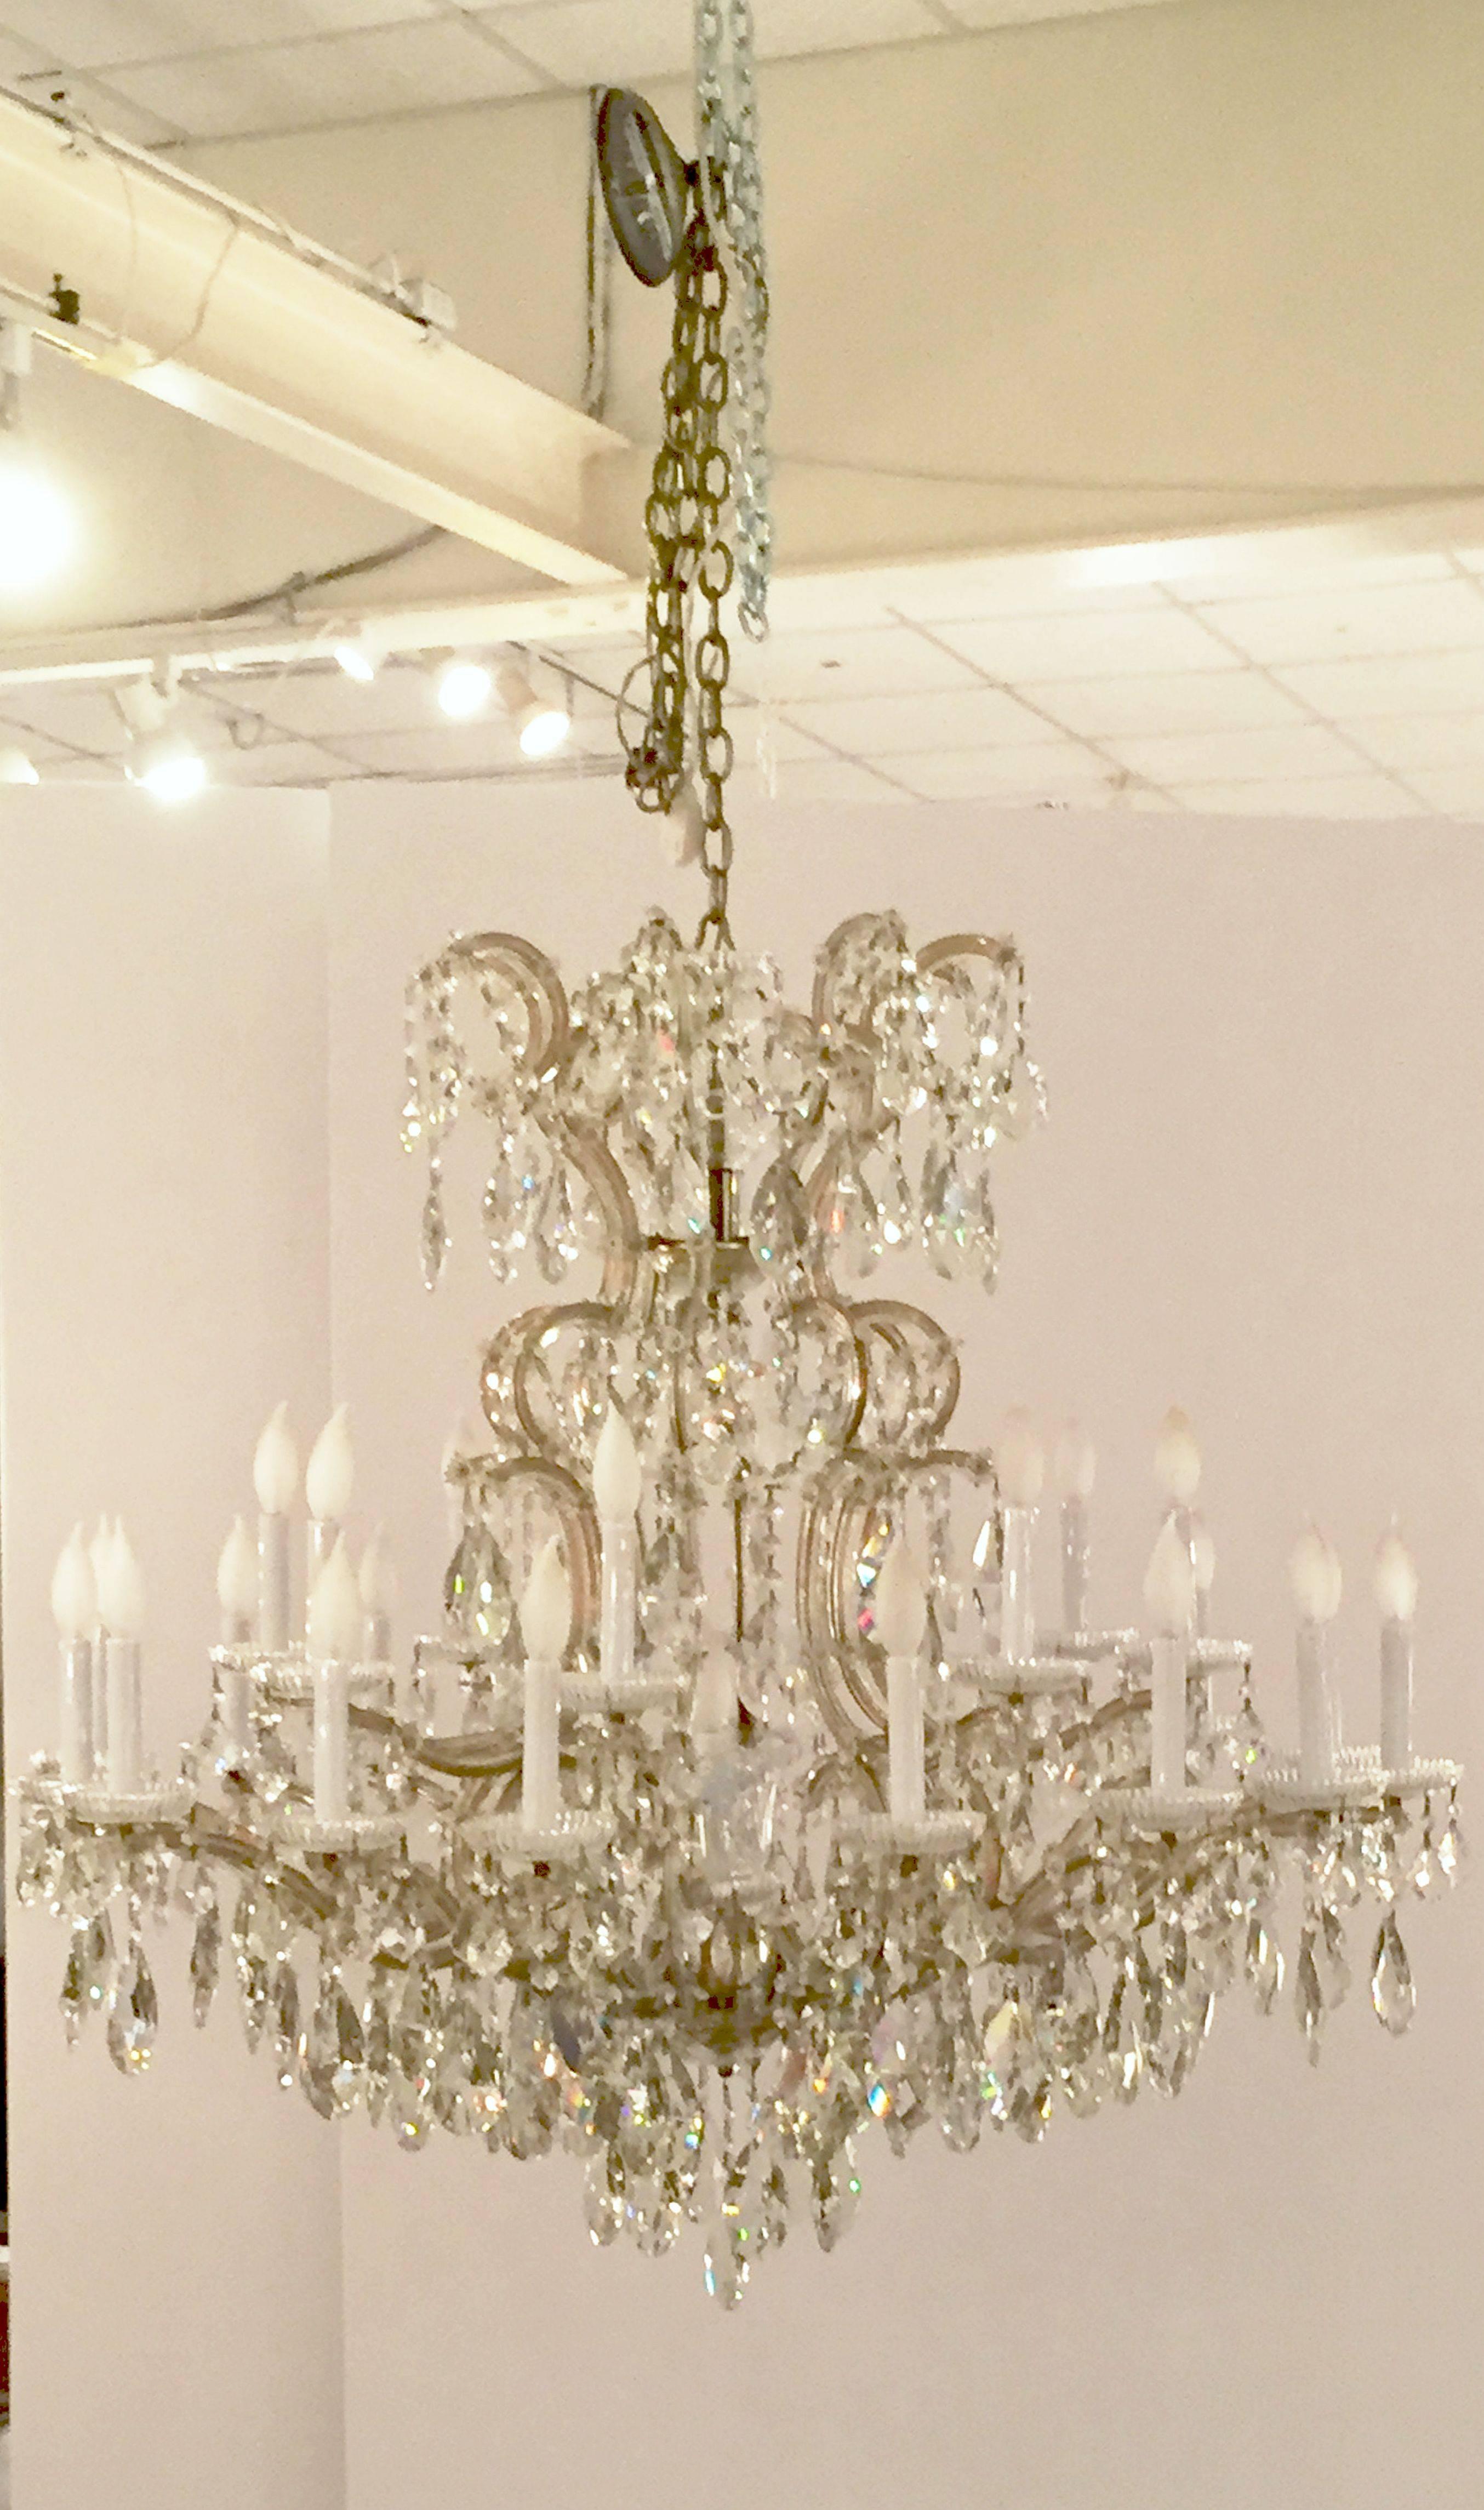 A lovely extra large Maria Theresa style twenty-four-light chandelier (or hanging fixture) of crystal, glass and gilt metal featuring 16 serpentine arms - the arms alternating between one light and two lights to each arm, each candle light with